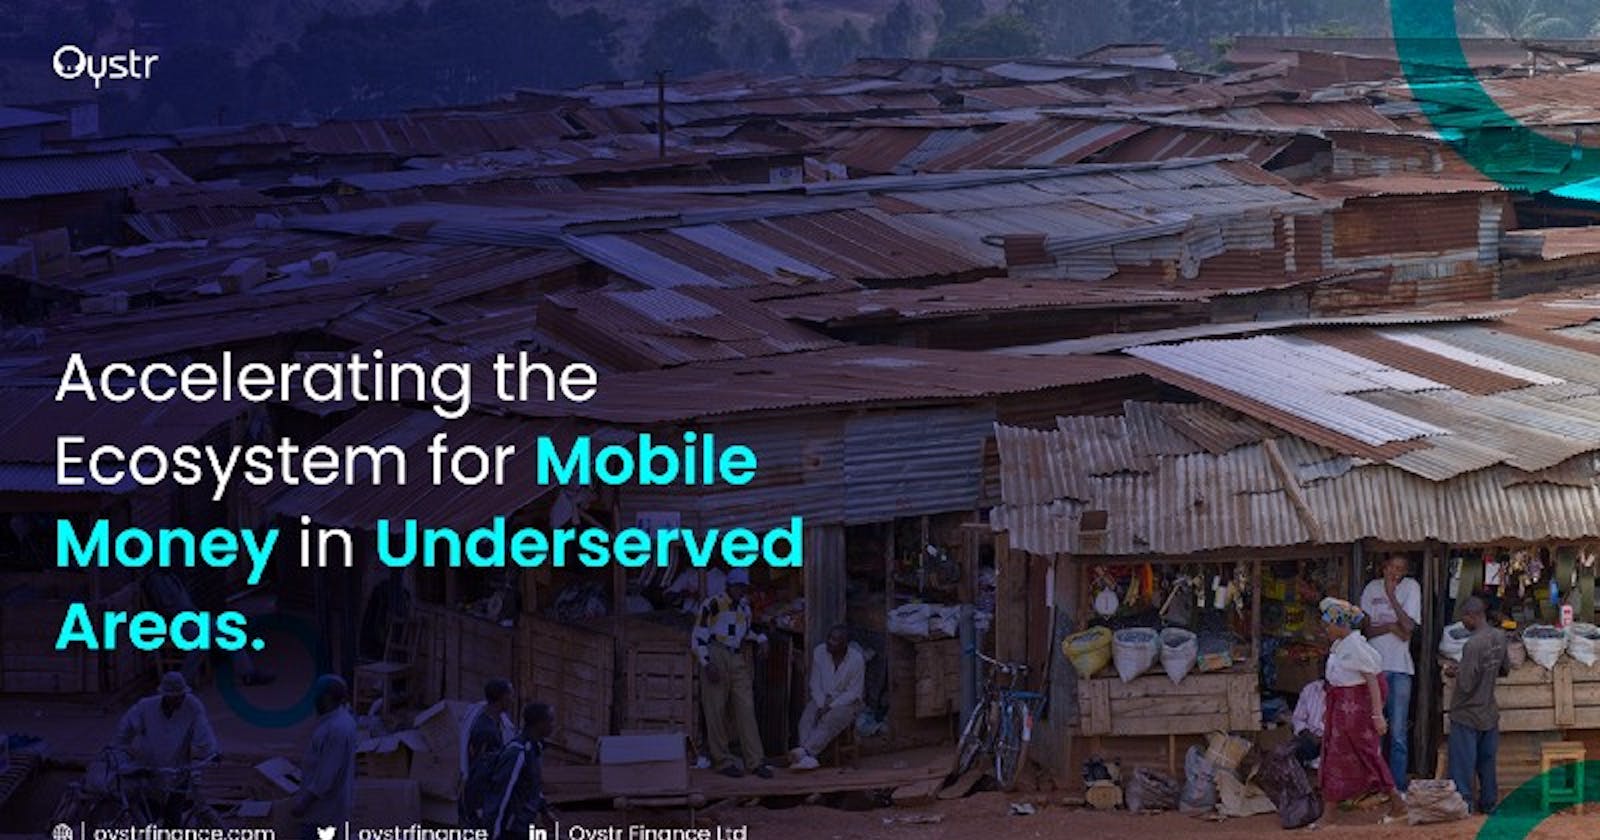 Accelerating the Mobile Money Ecosystem in the Underserved Areas